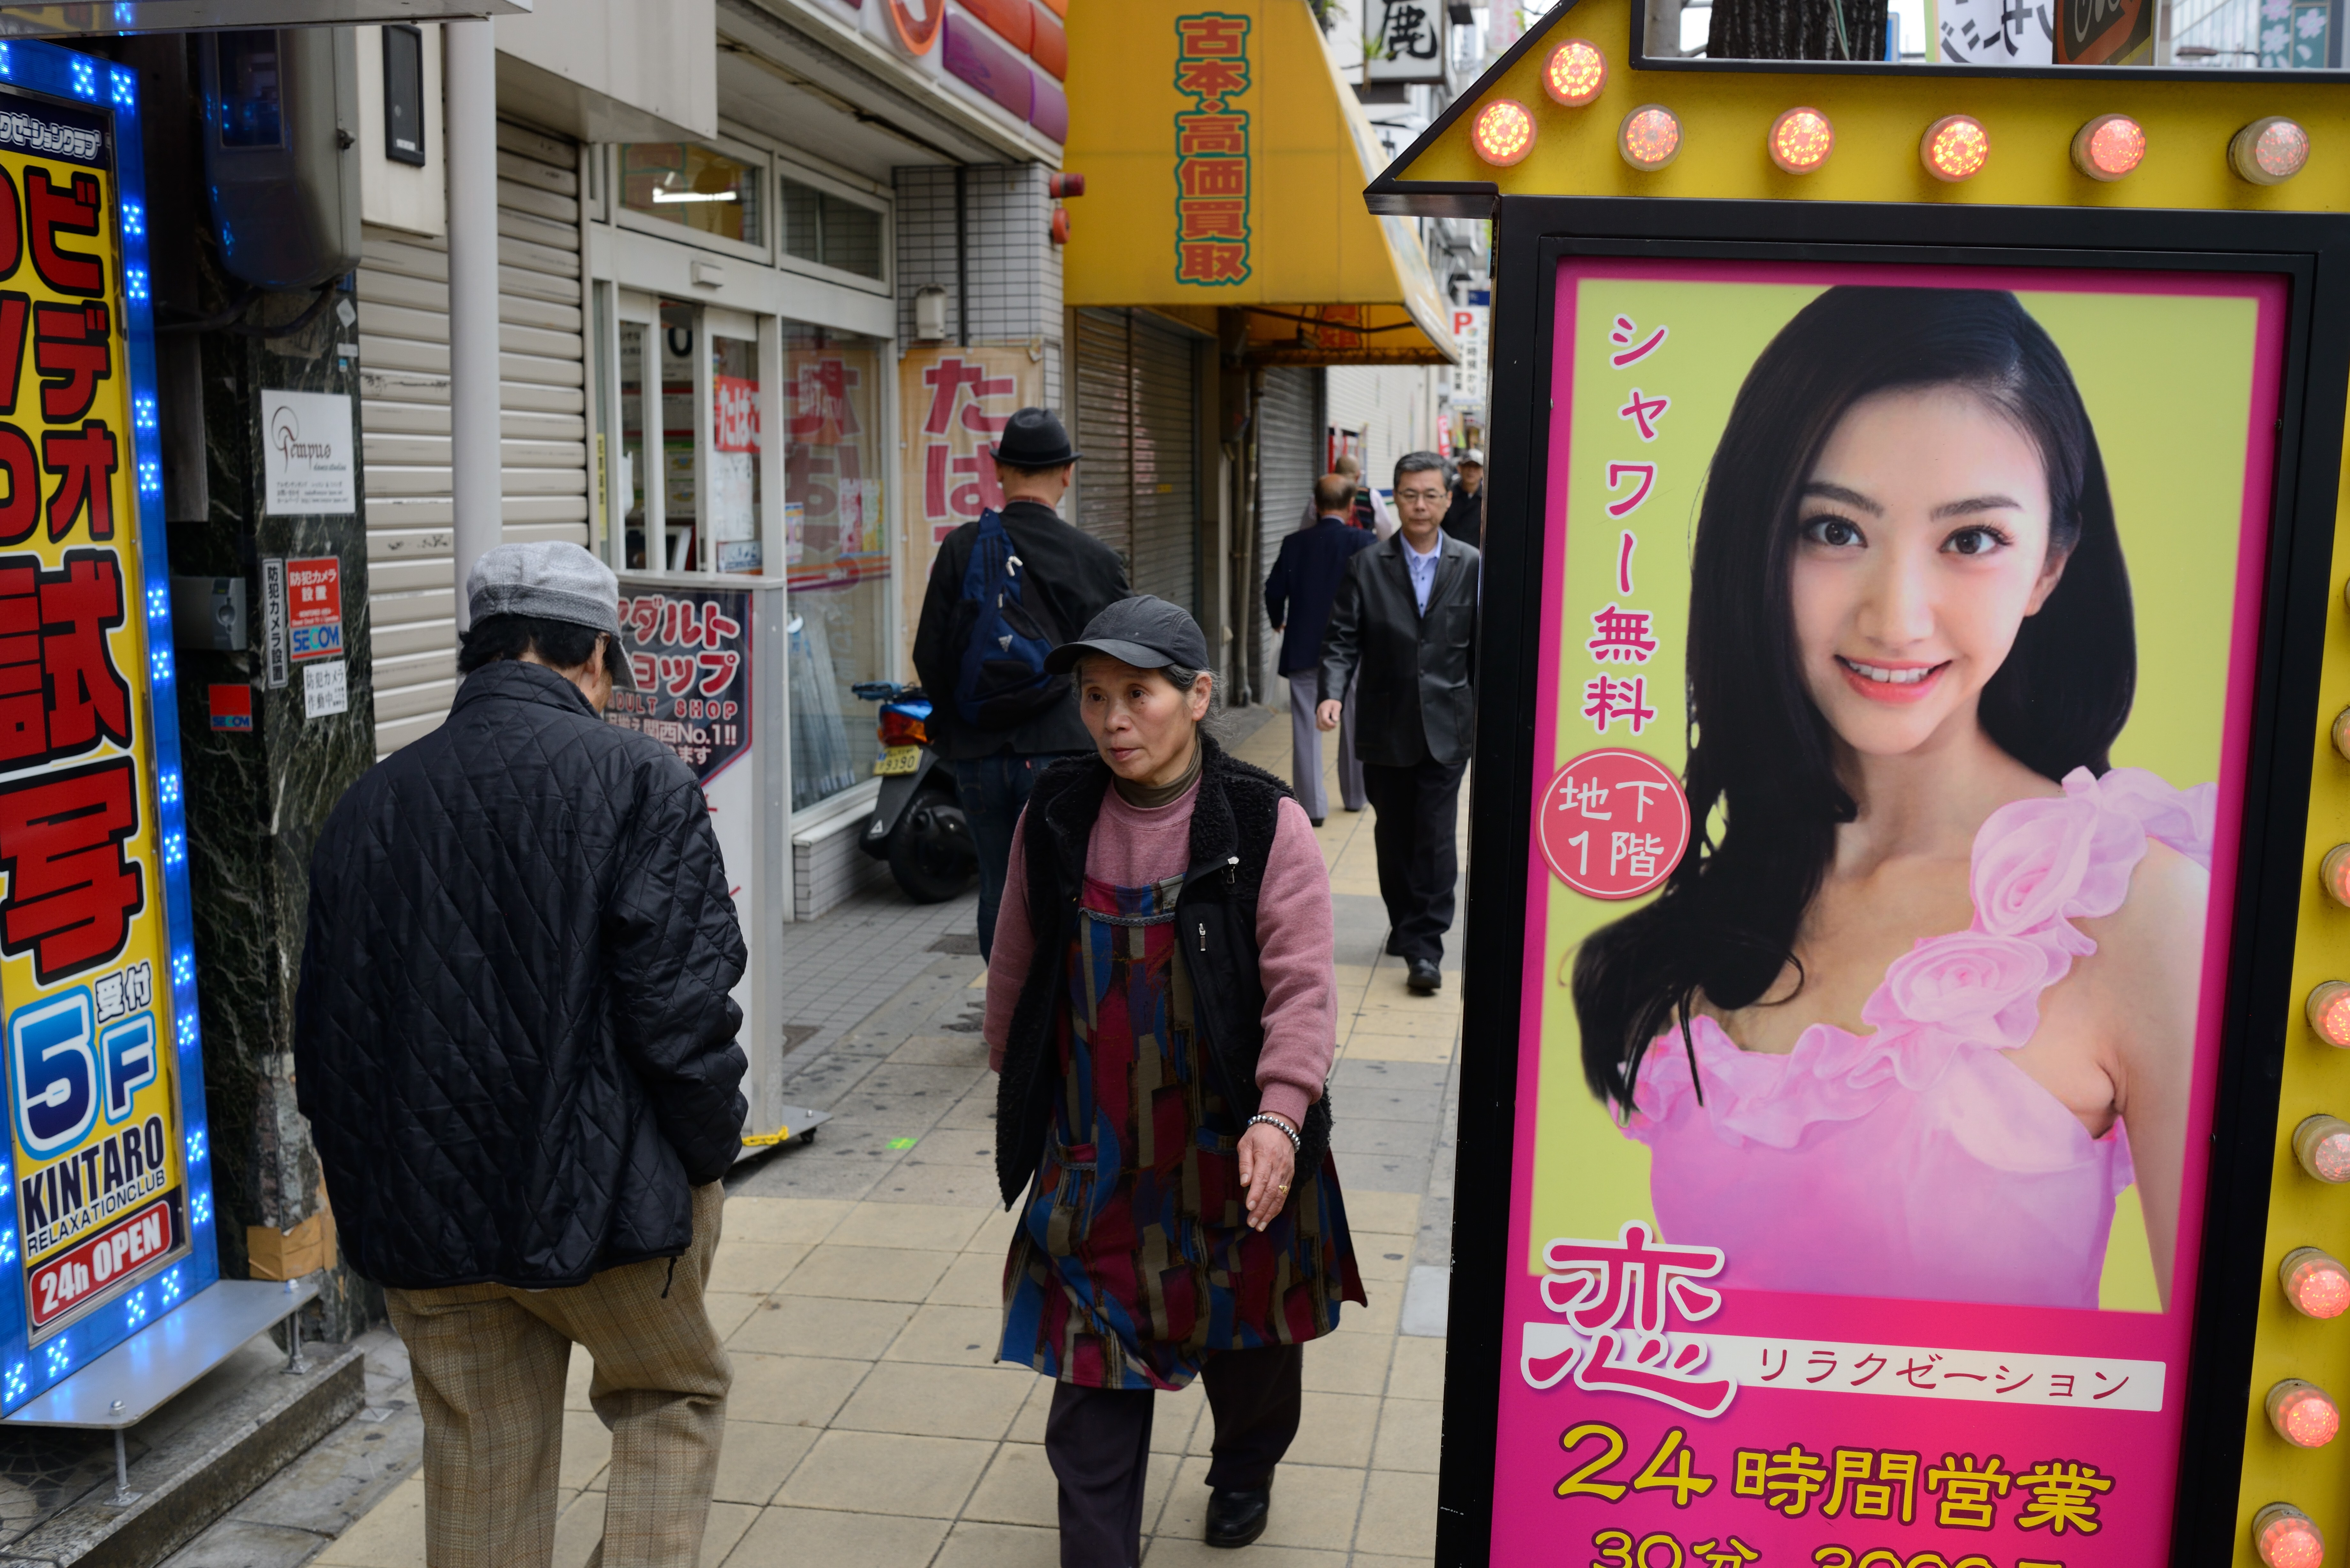 JAPAN, OSAKA - MARCH 28 : The city of Osaka. Fashion street in the shopping area of Osaka on March 28, 2015 in Osaka, Japan. (Photo by FrÃ©dÃ©ric Soltan/Corbis via Getty Images)